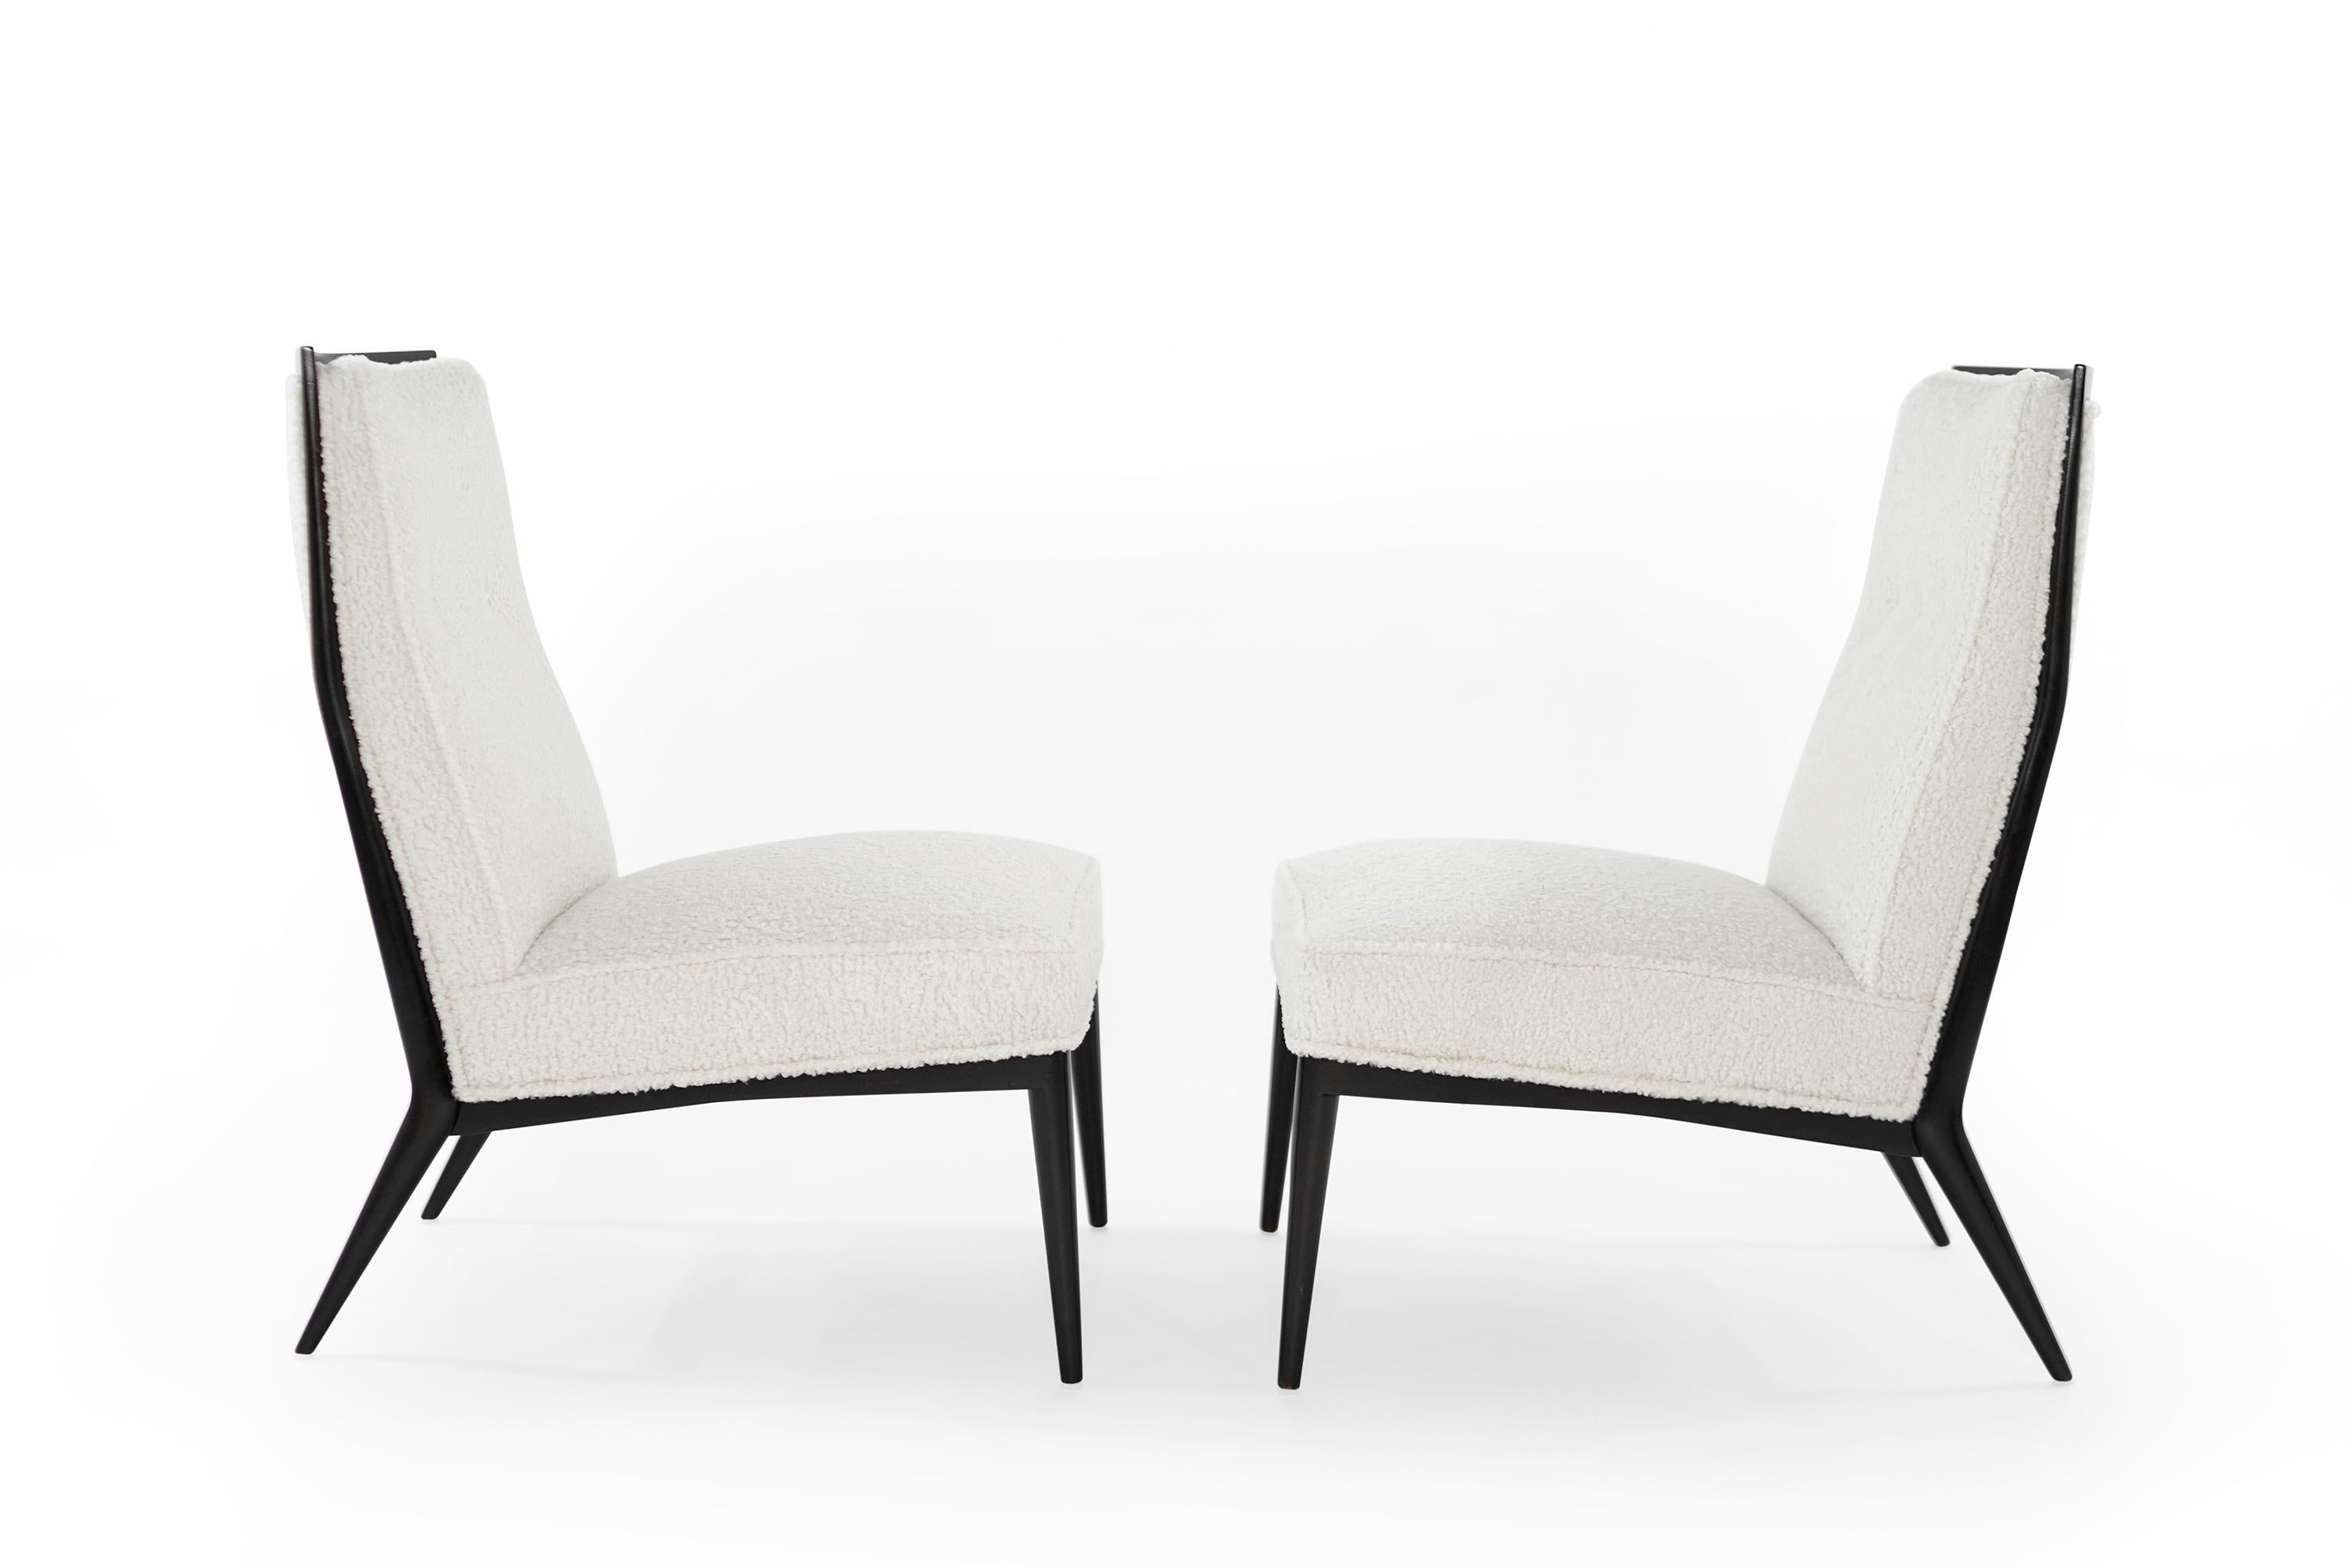 Uncommon set of beautifully restored slipper chairs designed by Paul McCobb for Directional, circa 1950s. Re-upholstered in off-white bouclé, maple frames refinished in espresso.